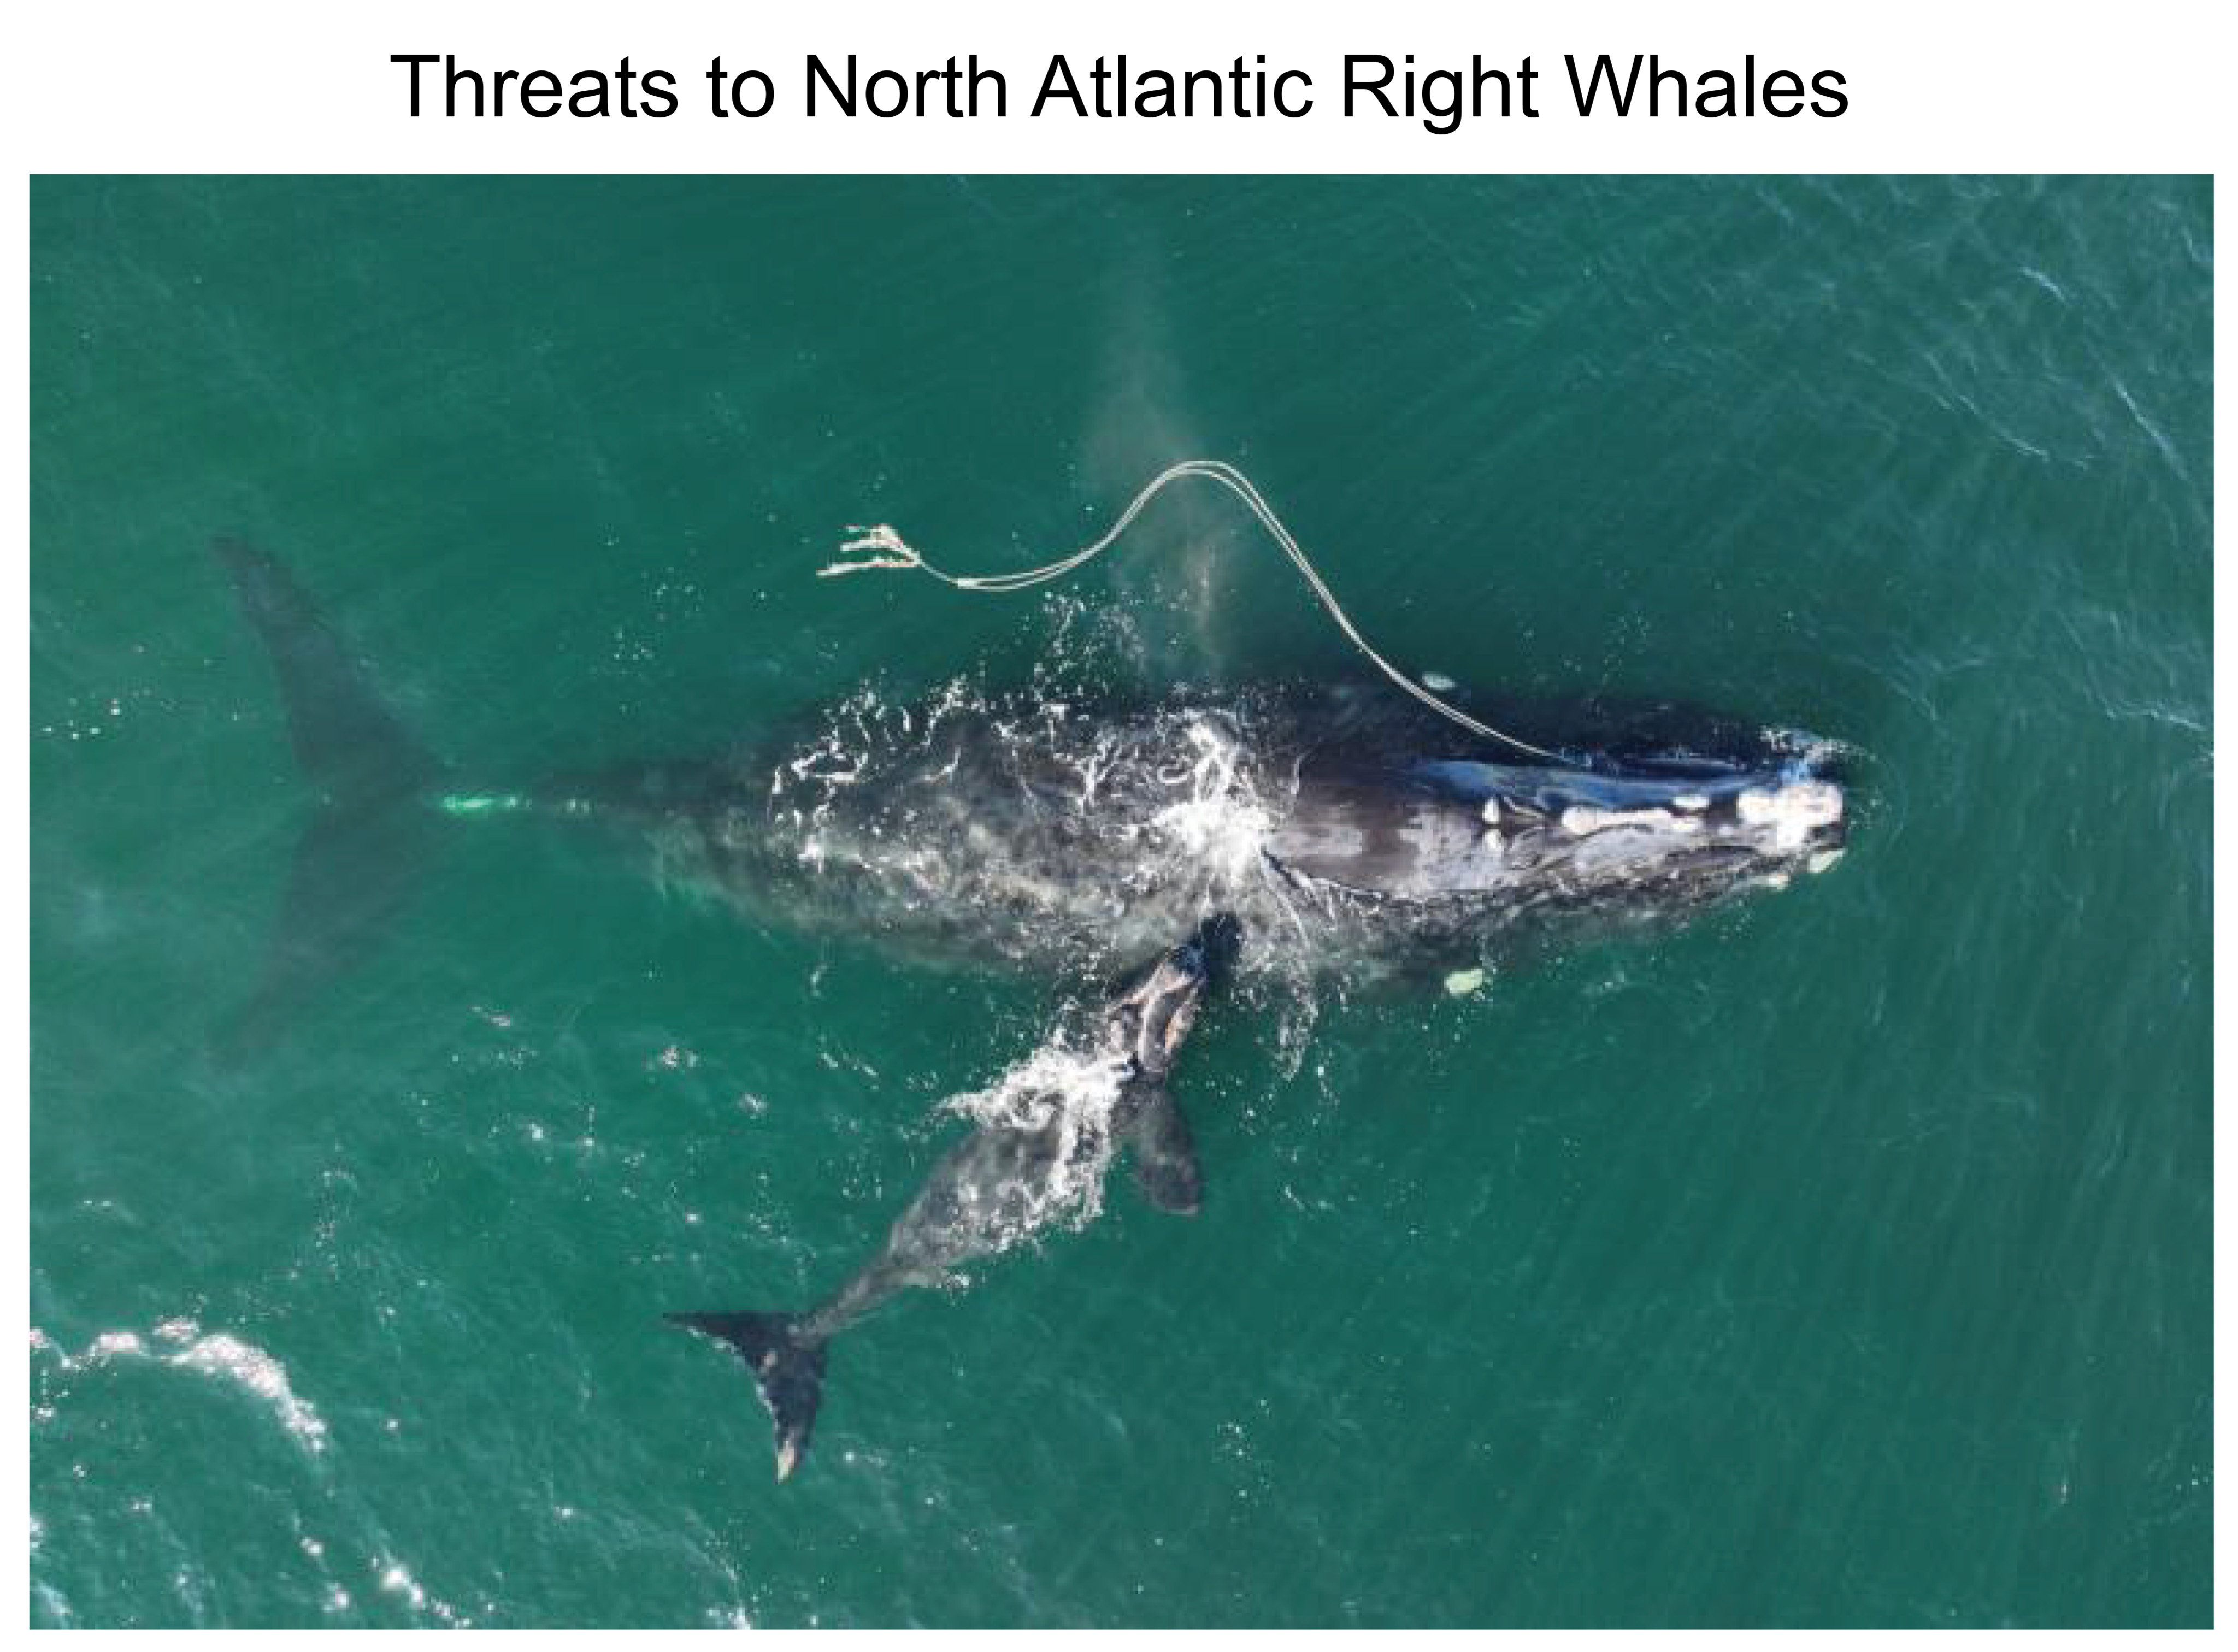 Threats to North Atlantic Right Whales